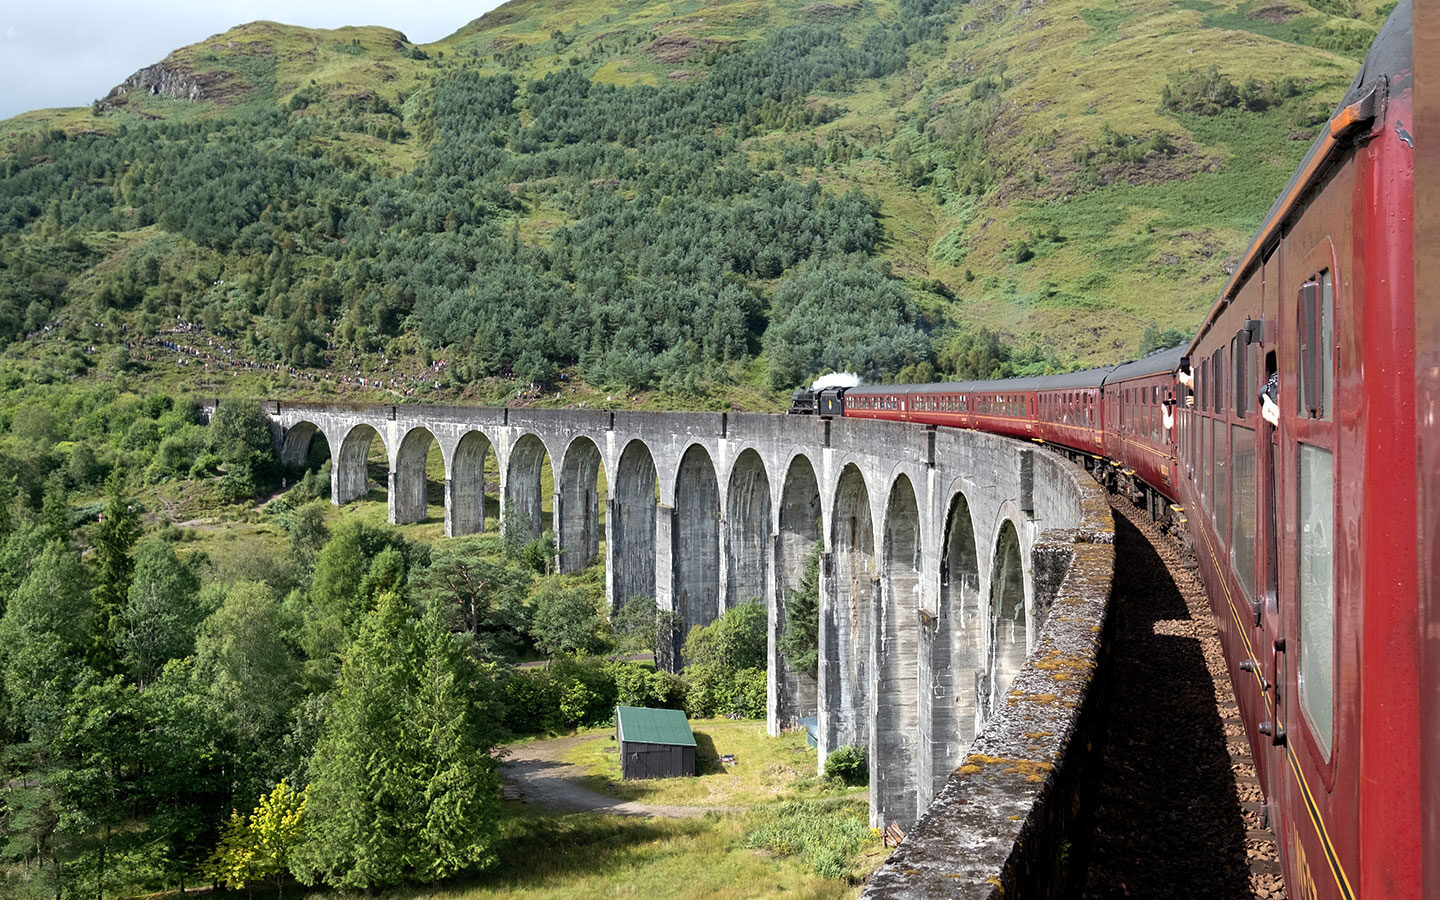 The Jacobite steam train crossing the Glenfinnan Viaduct